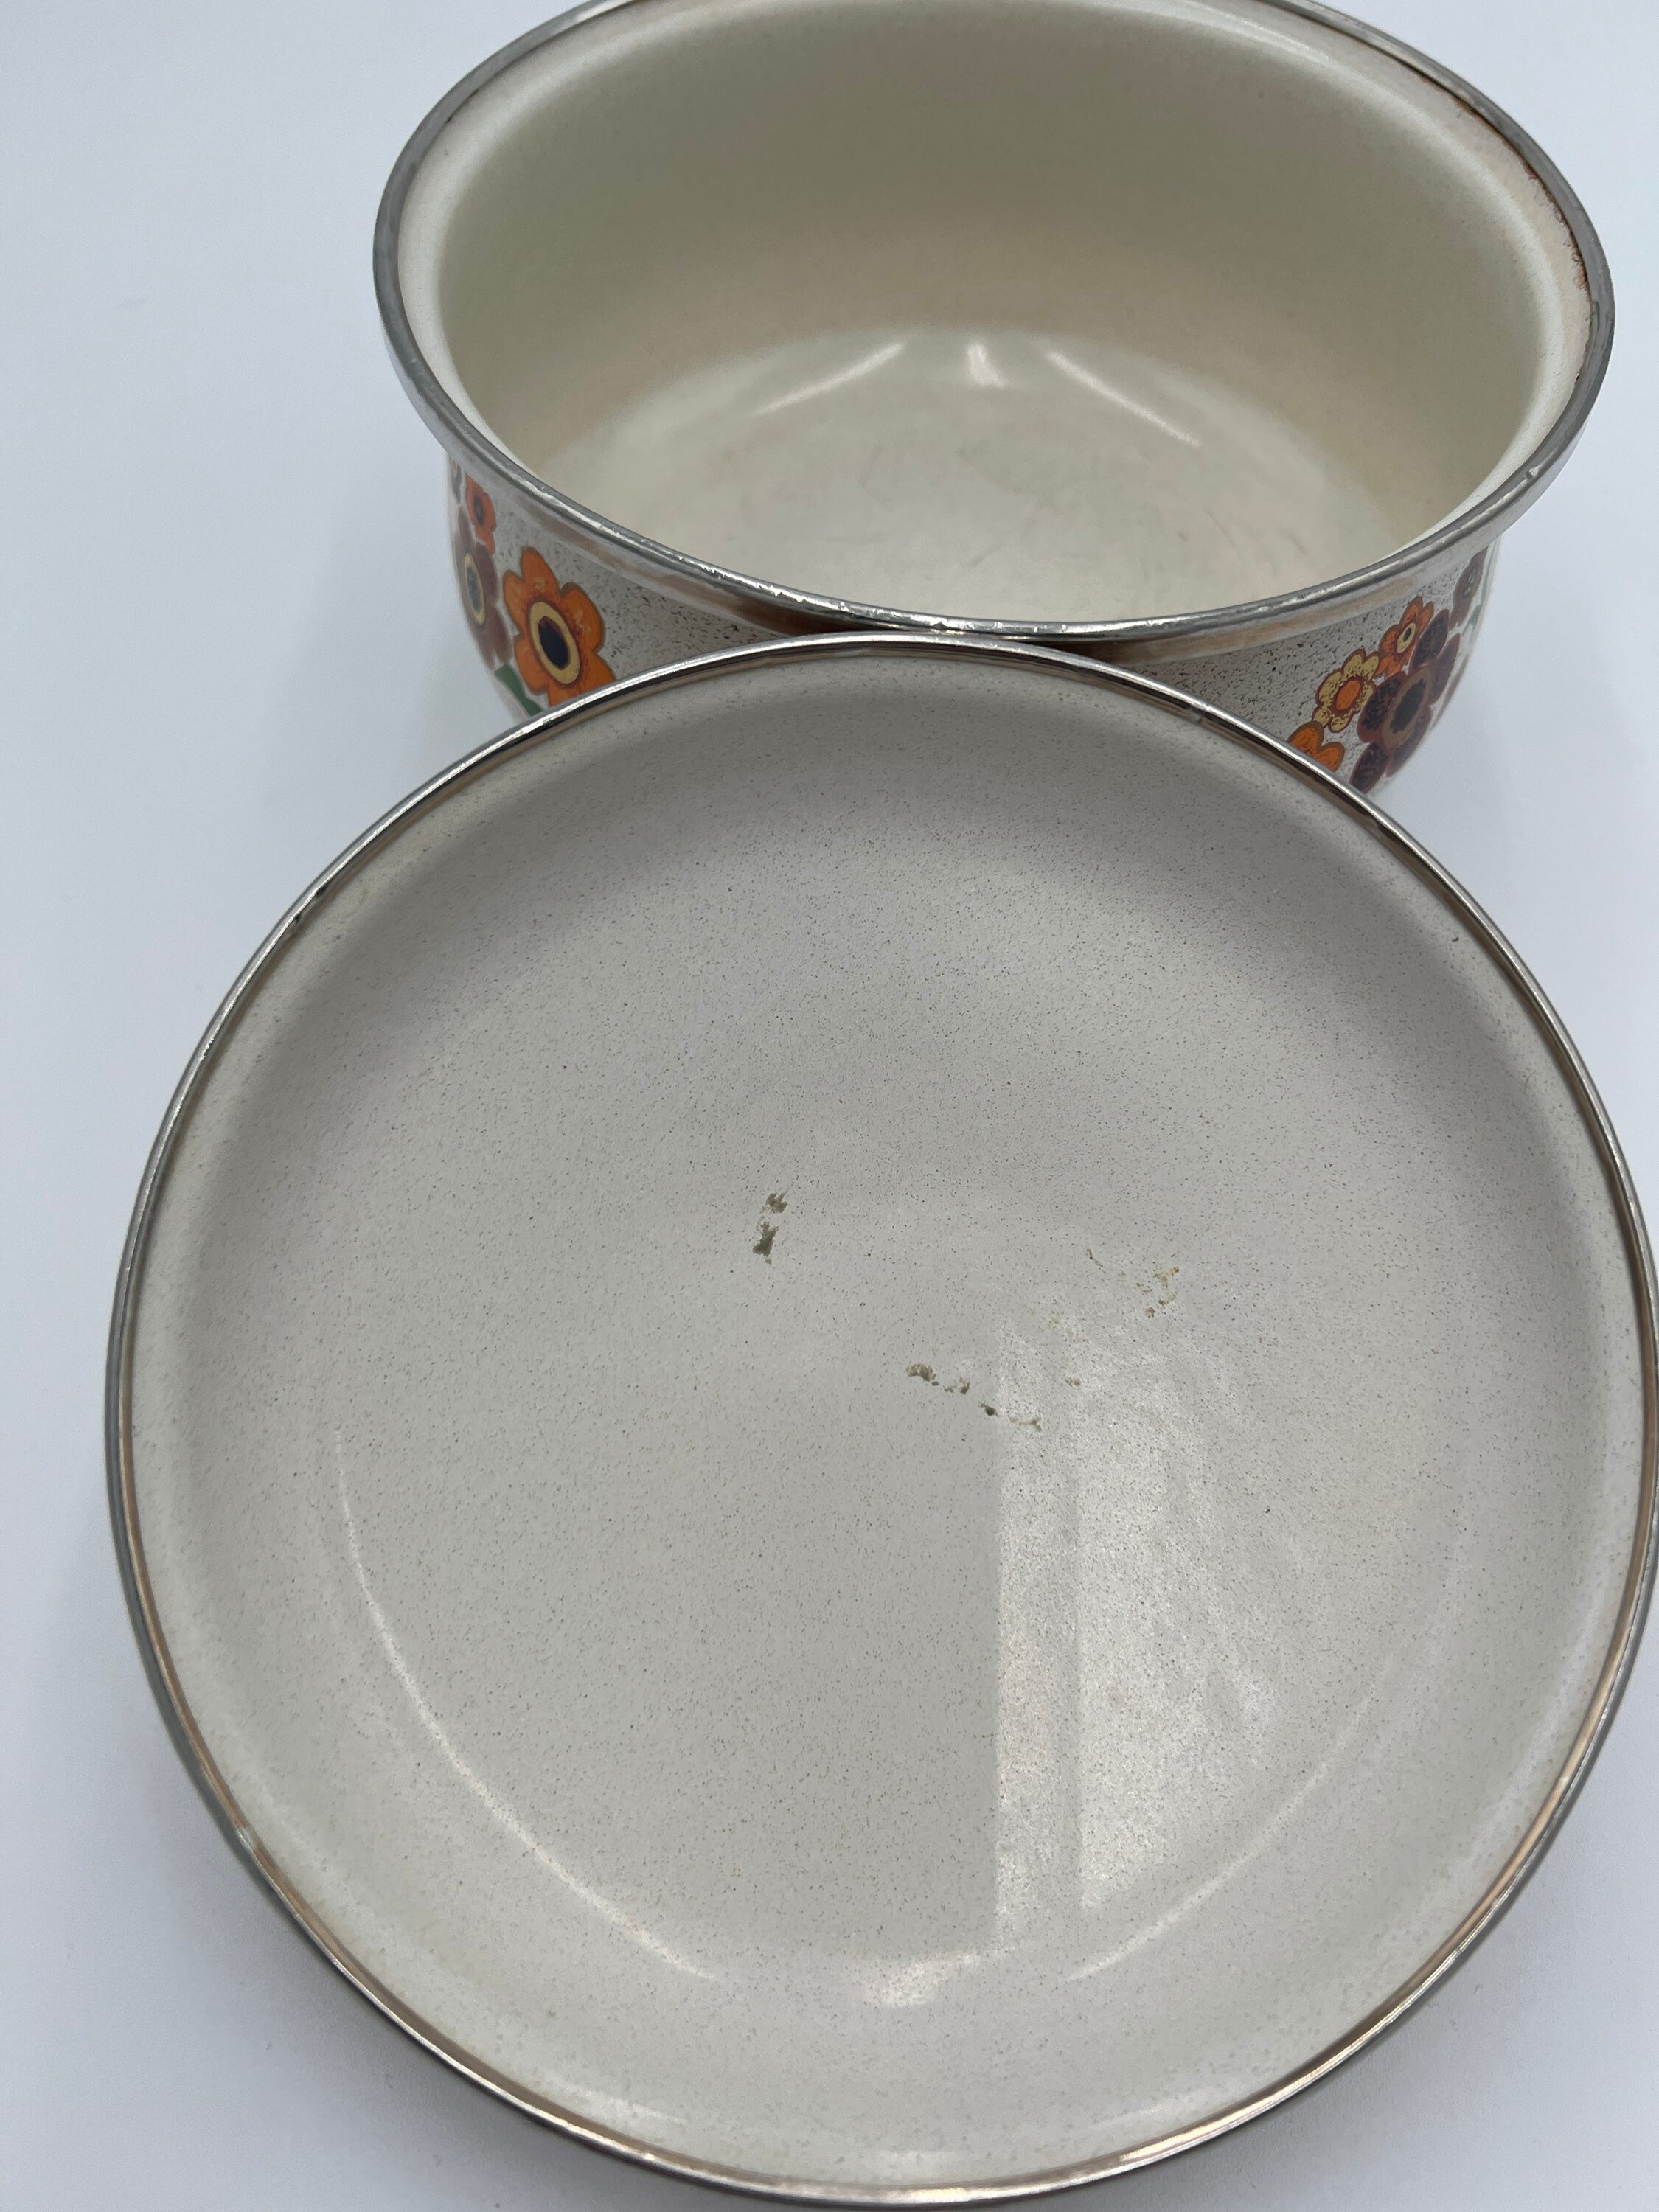 Vintage Handcrafted 1.5 Quart Sauce Pan Crowning Touch Porcelain Enamel  Cookware Harvest Blossom With Lid. Made in Spain. 